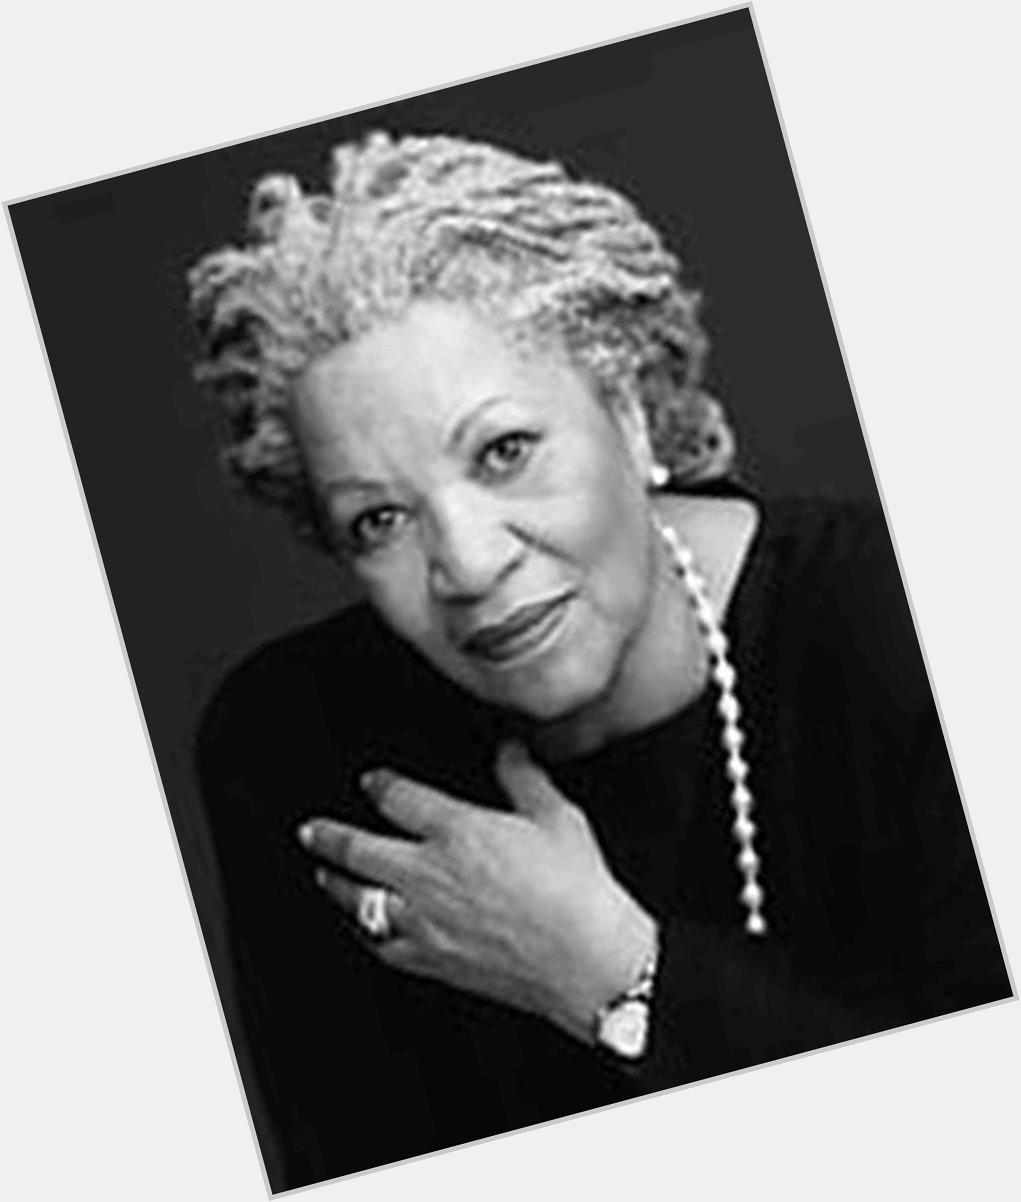 Happy birthday to my literary inspiration, Toni Morrison. Her words are a blessing. 